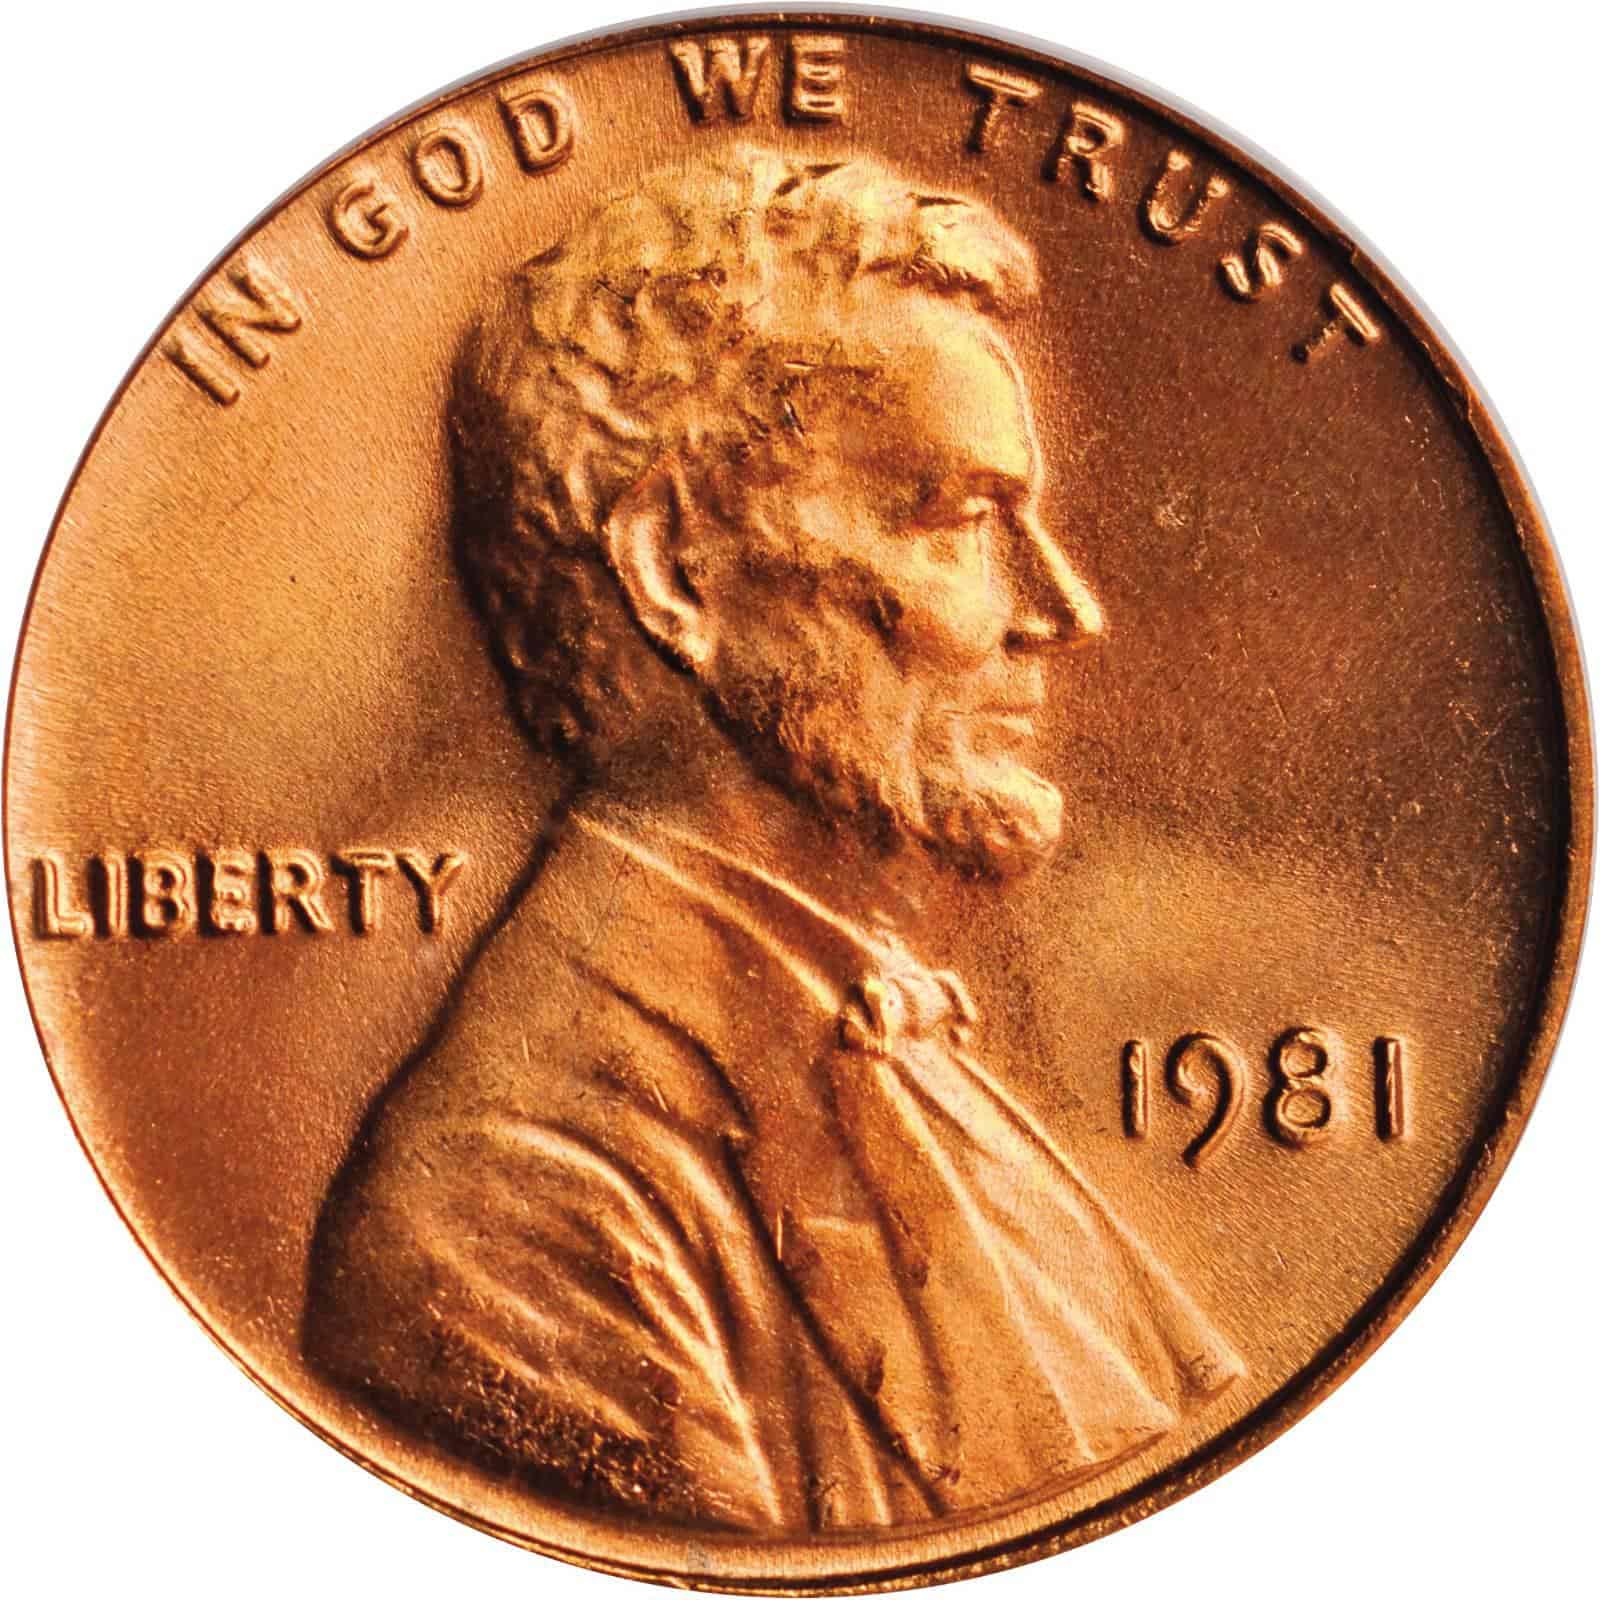 The Obverse of the 1981 Penny